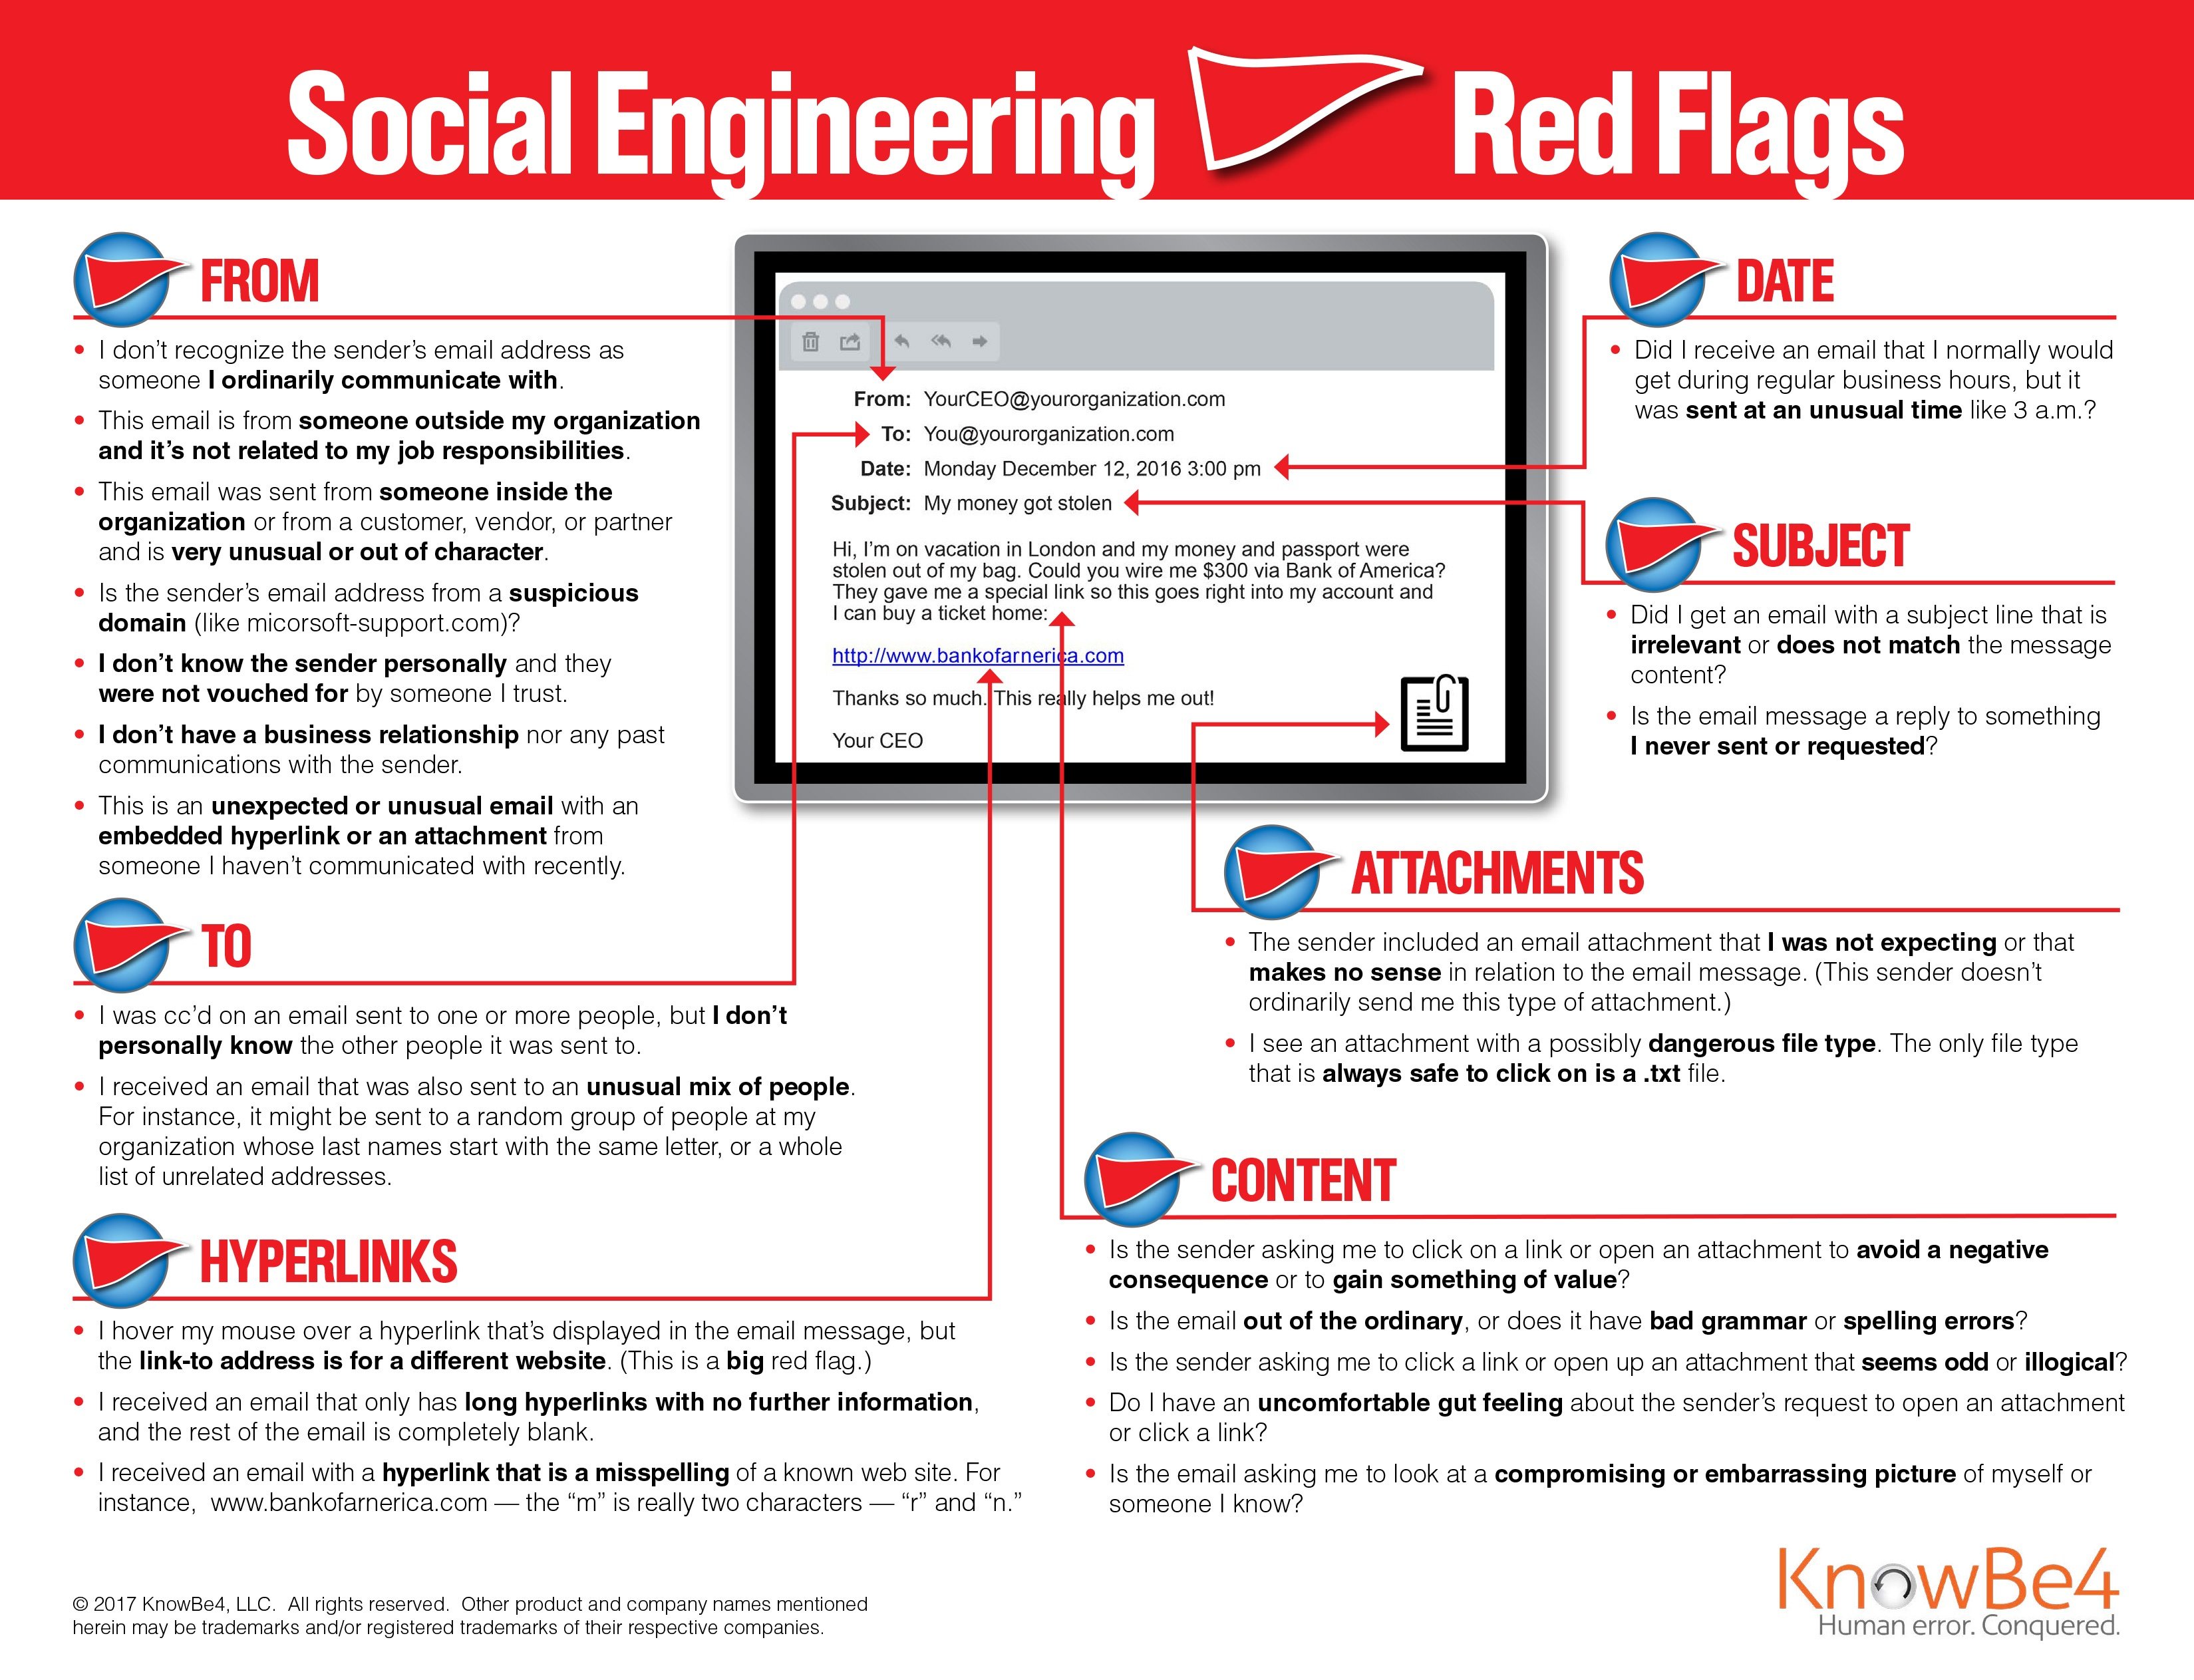 Red Flag Icons by FaceCheck.ID Alert Users to Potential Dangers When  Meeting People Online